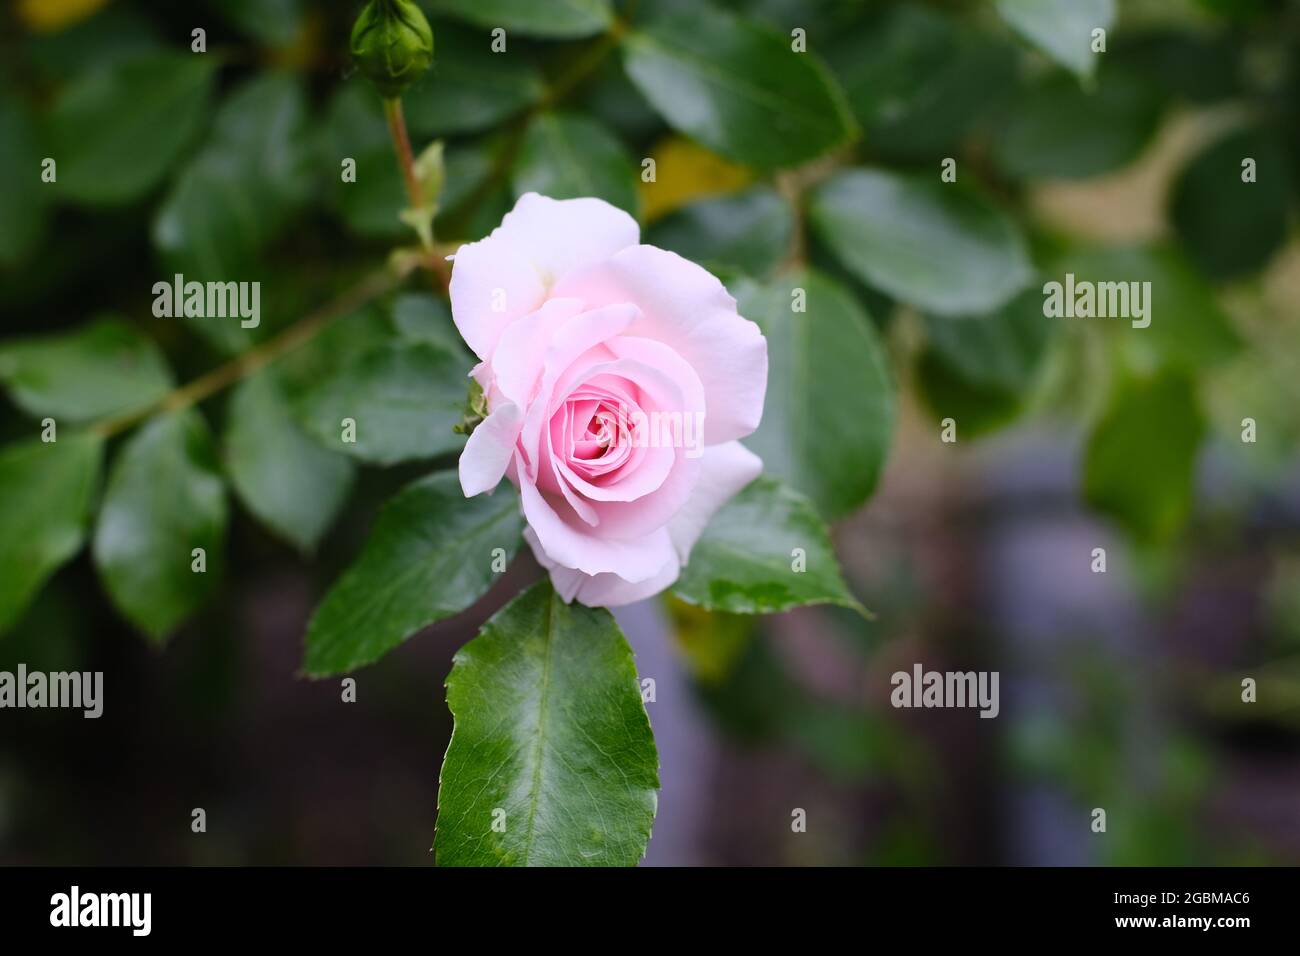 Focused pink rose (rosa luciae) in front of green blurred foliage Stock Photo